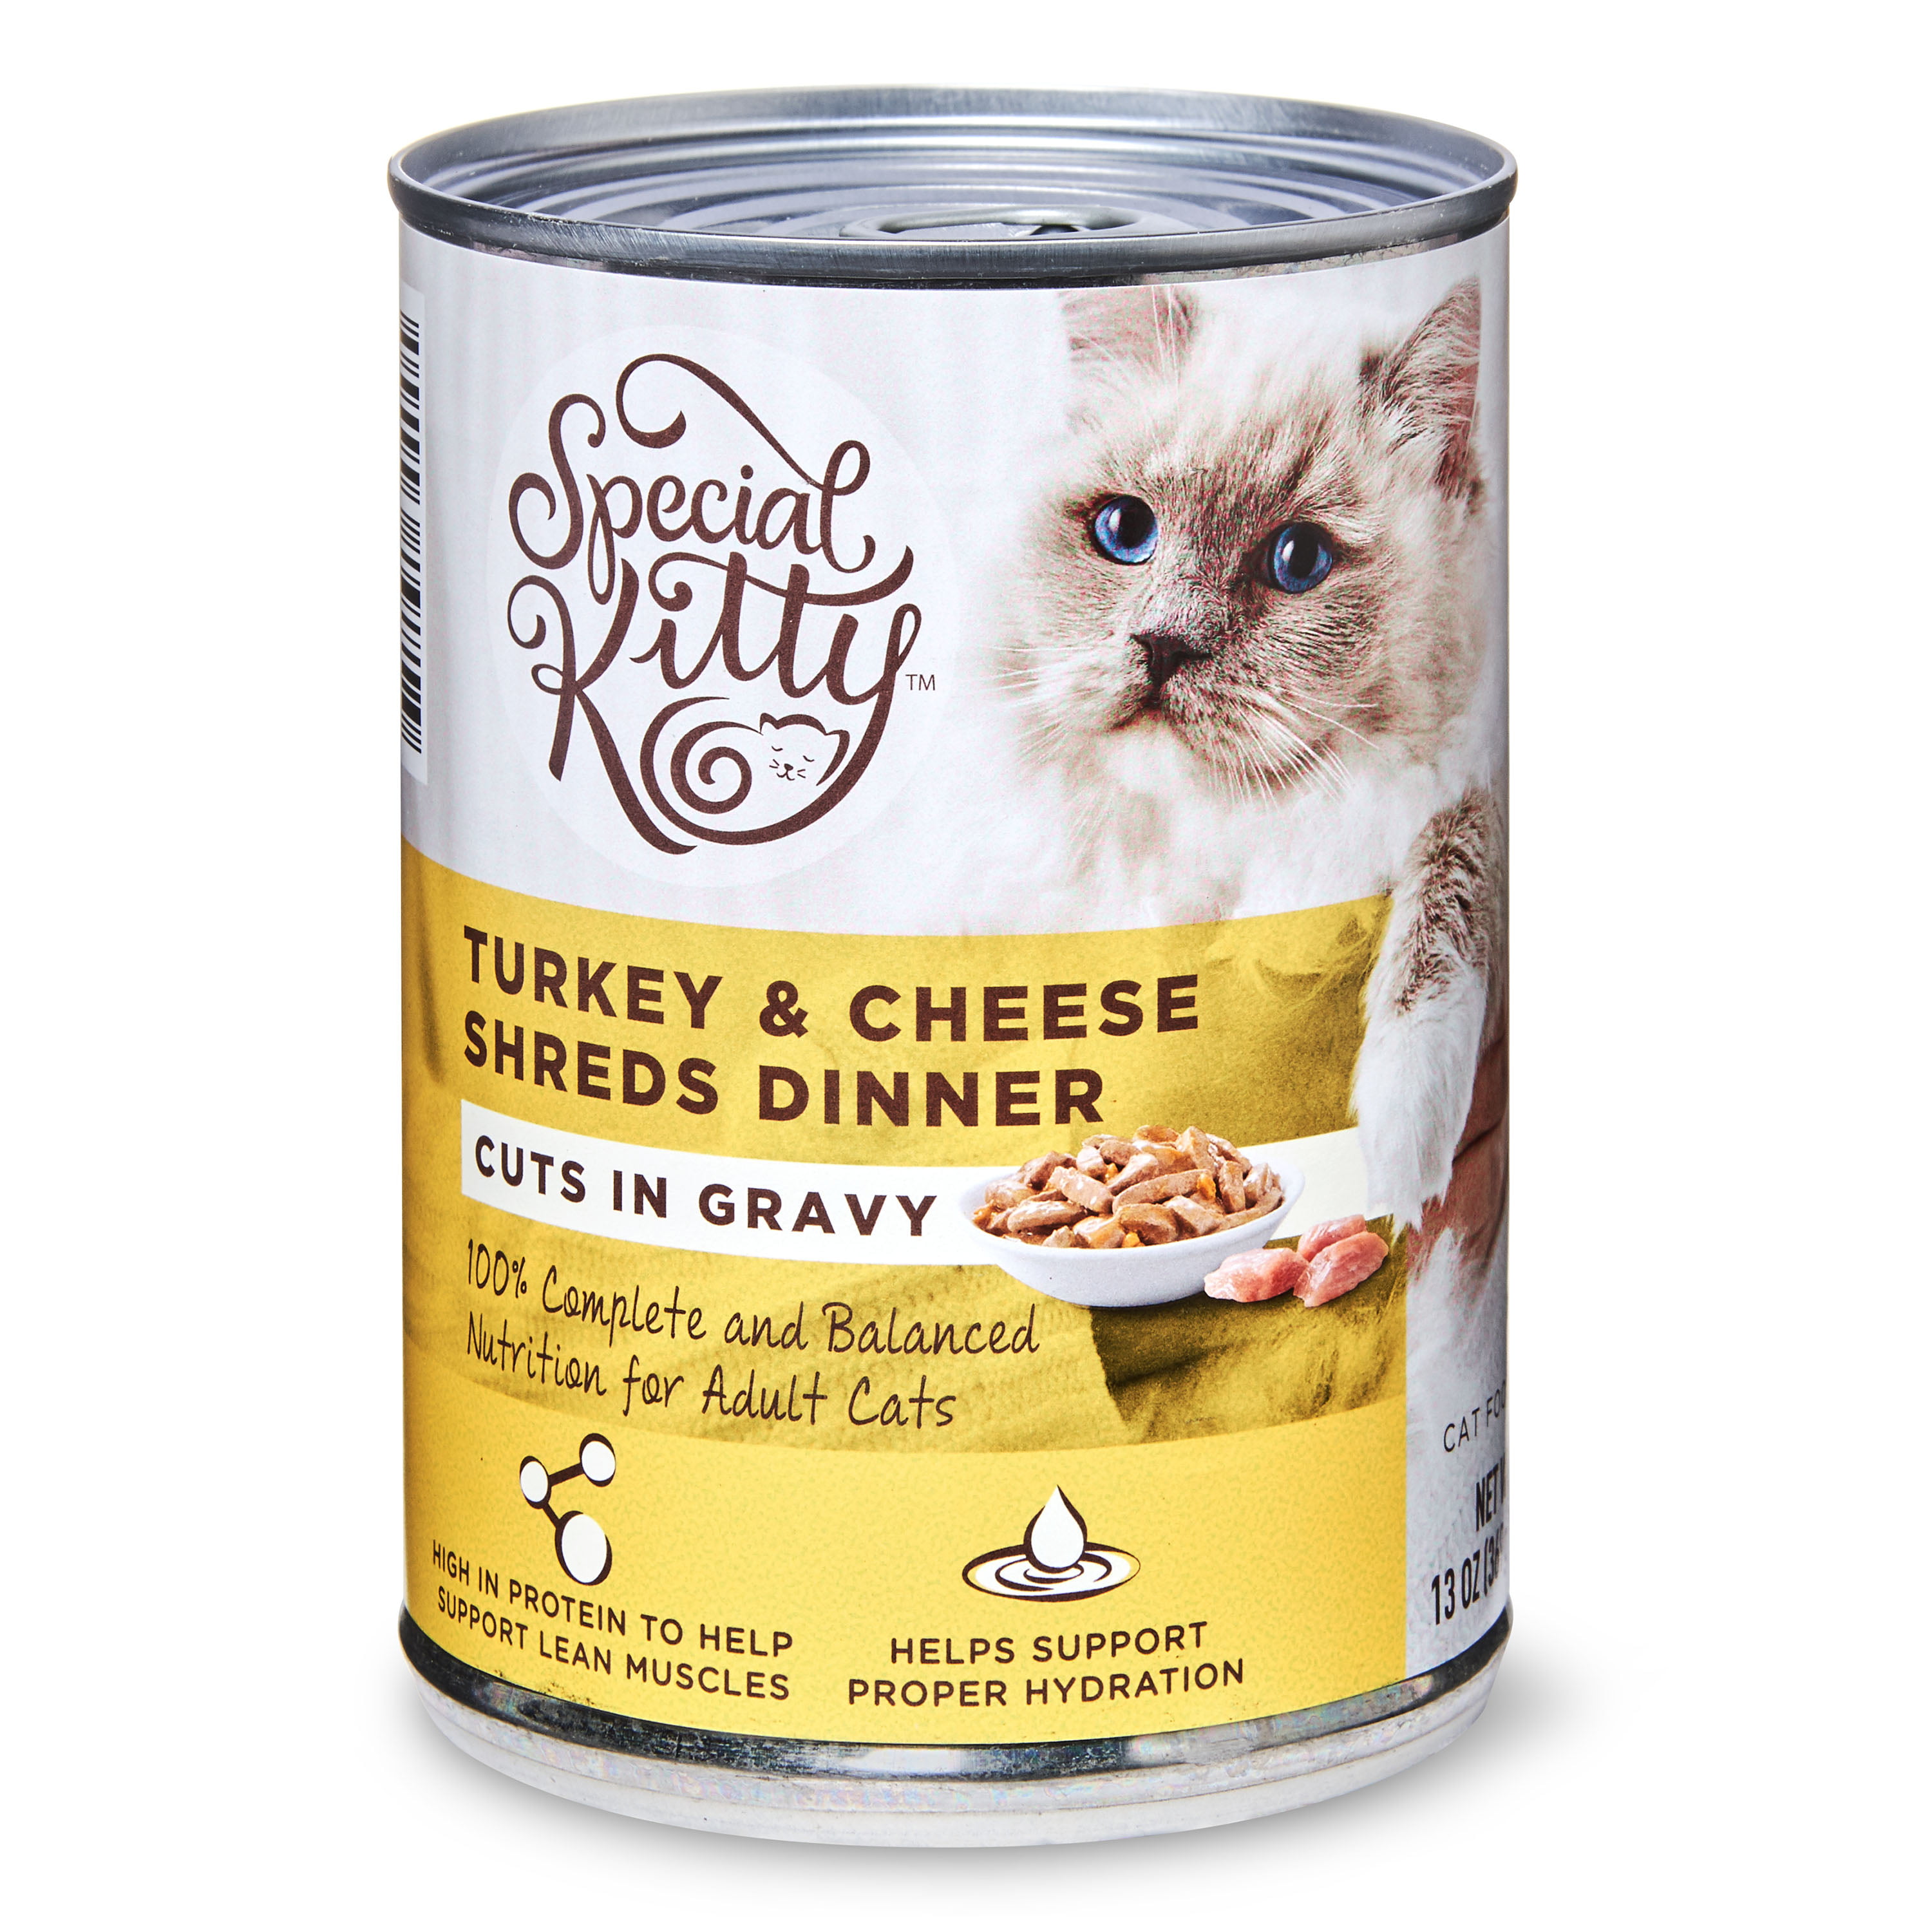 Special Kitty Turkey & Cheese Shreds Dinner Cuts in Gravy Cat Food, 13